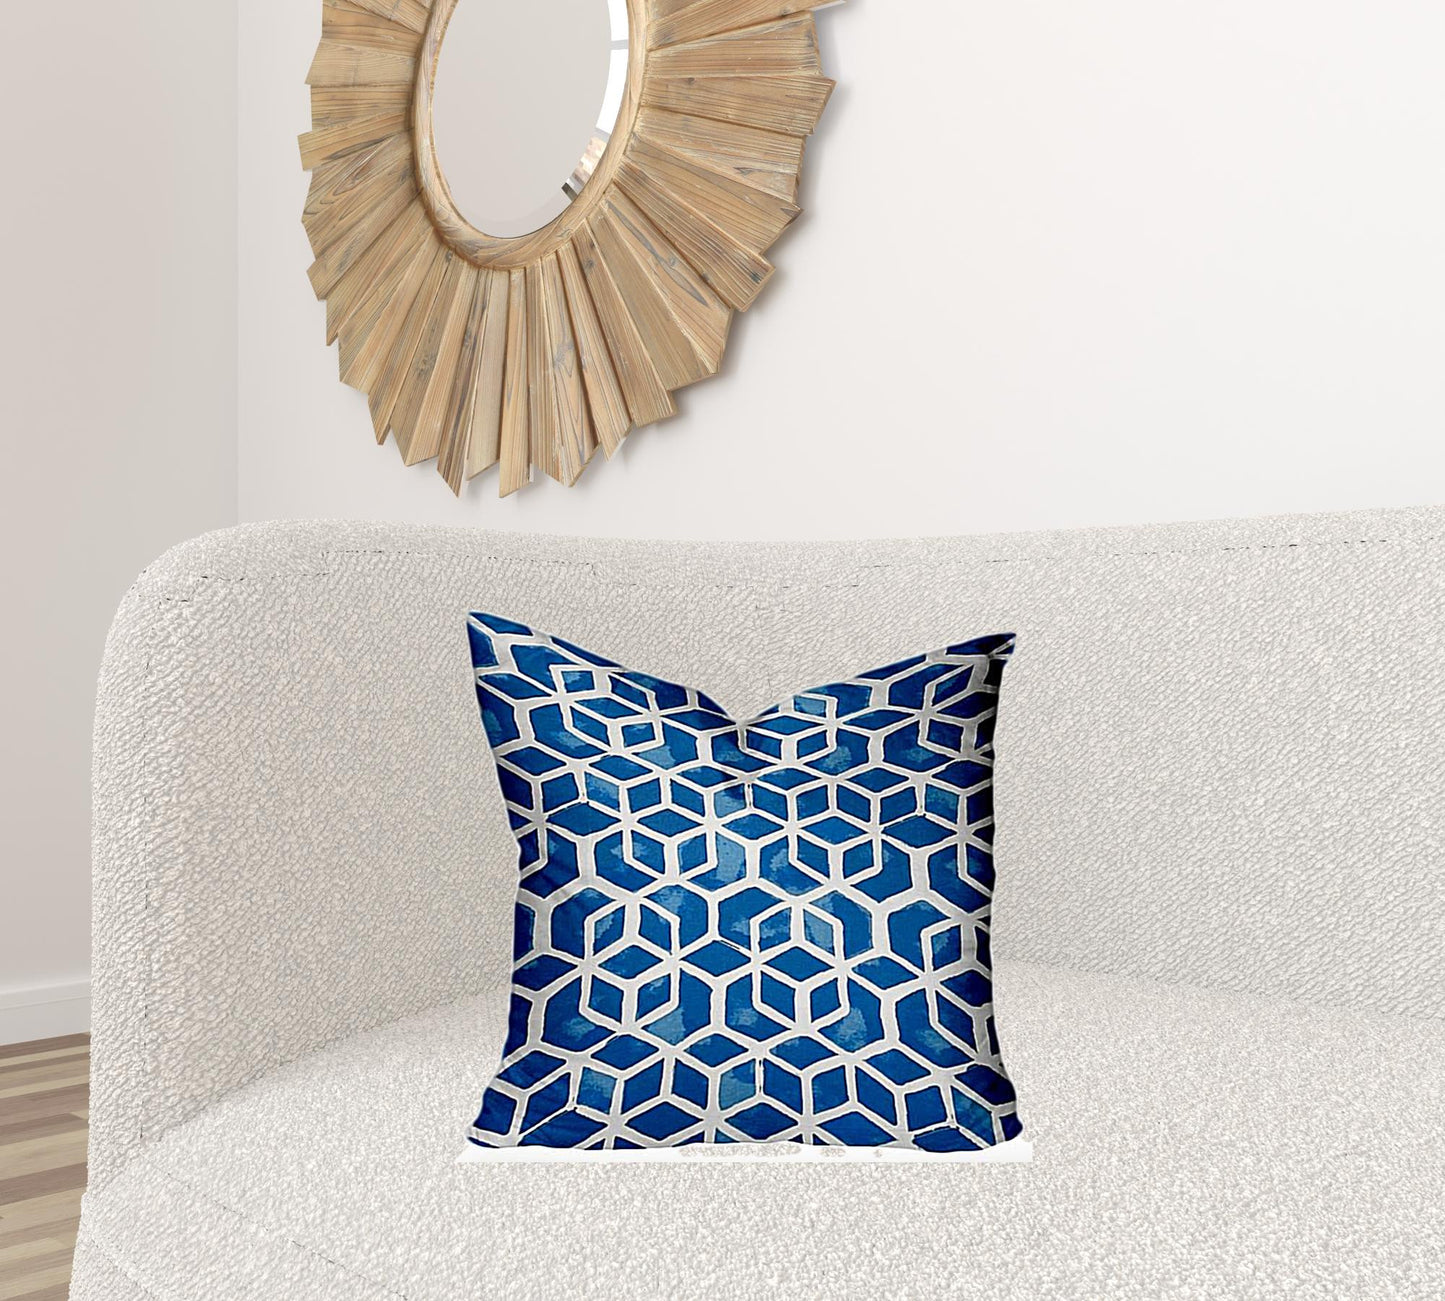 20" X 20" Blue And White Zippered Geometric Throw Indoor Outdoor Pillow Cover